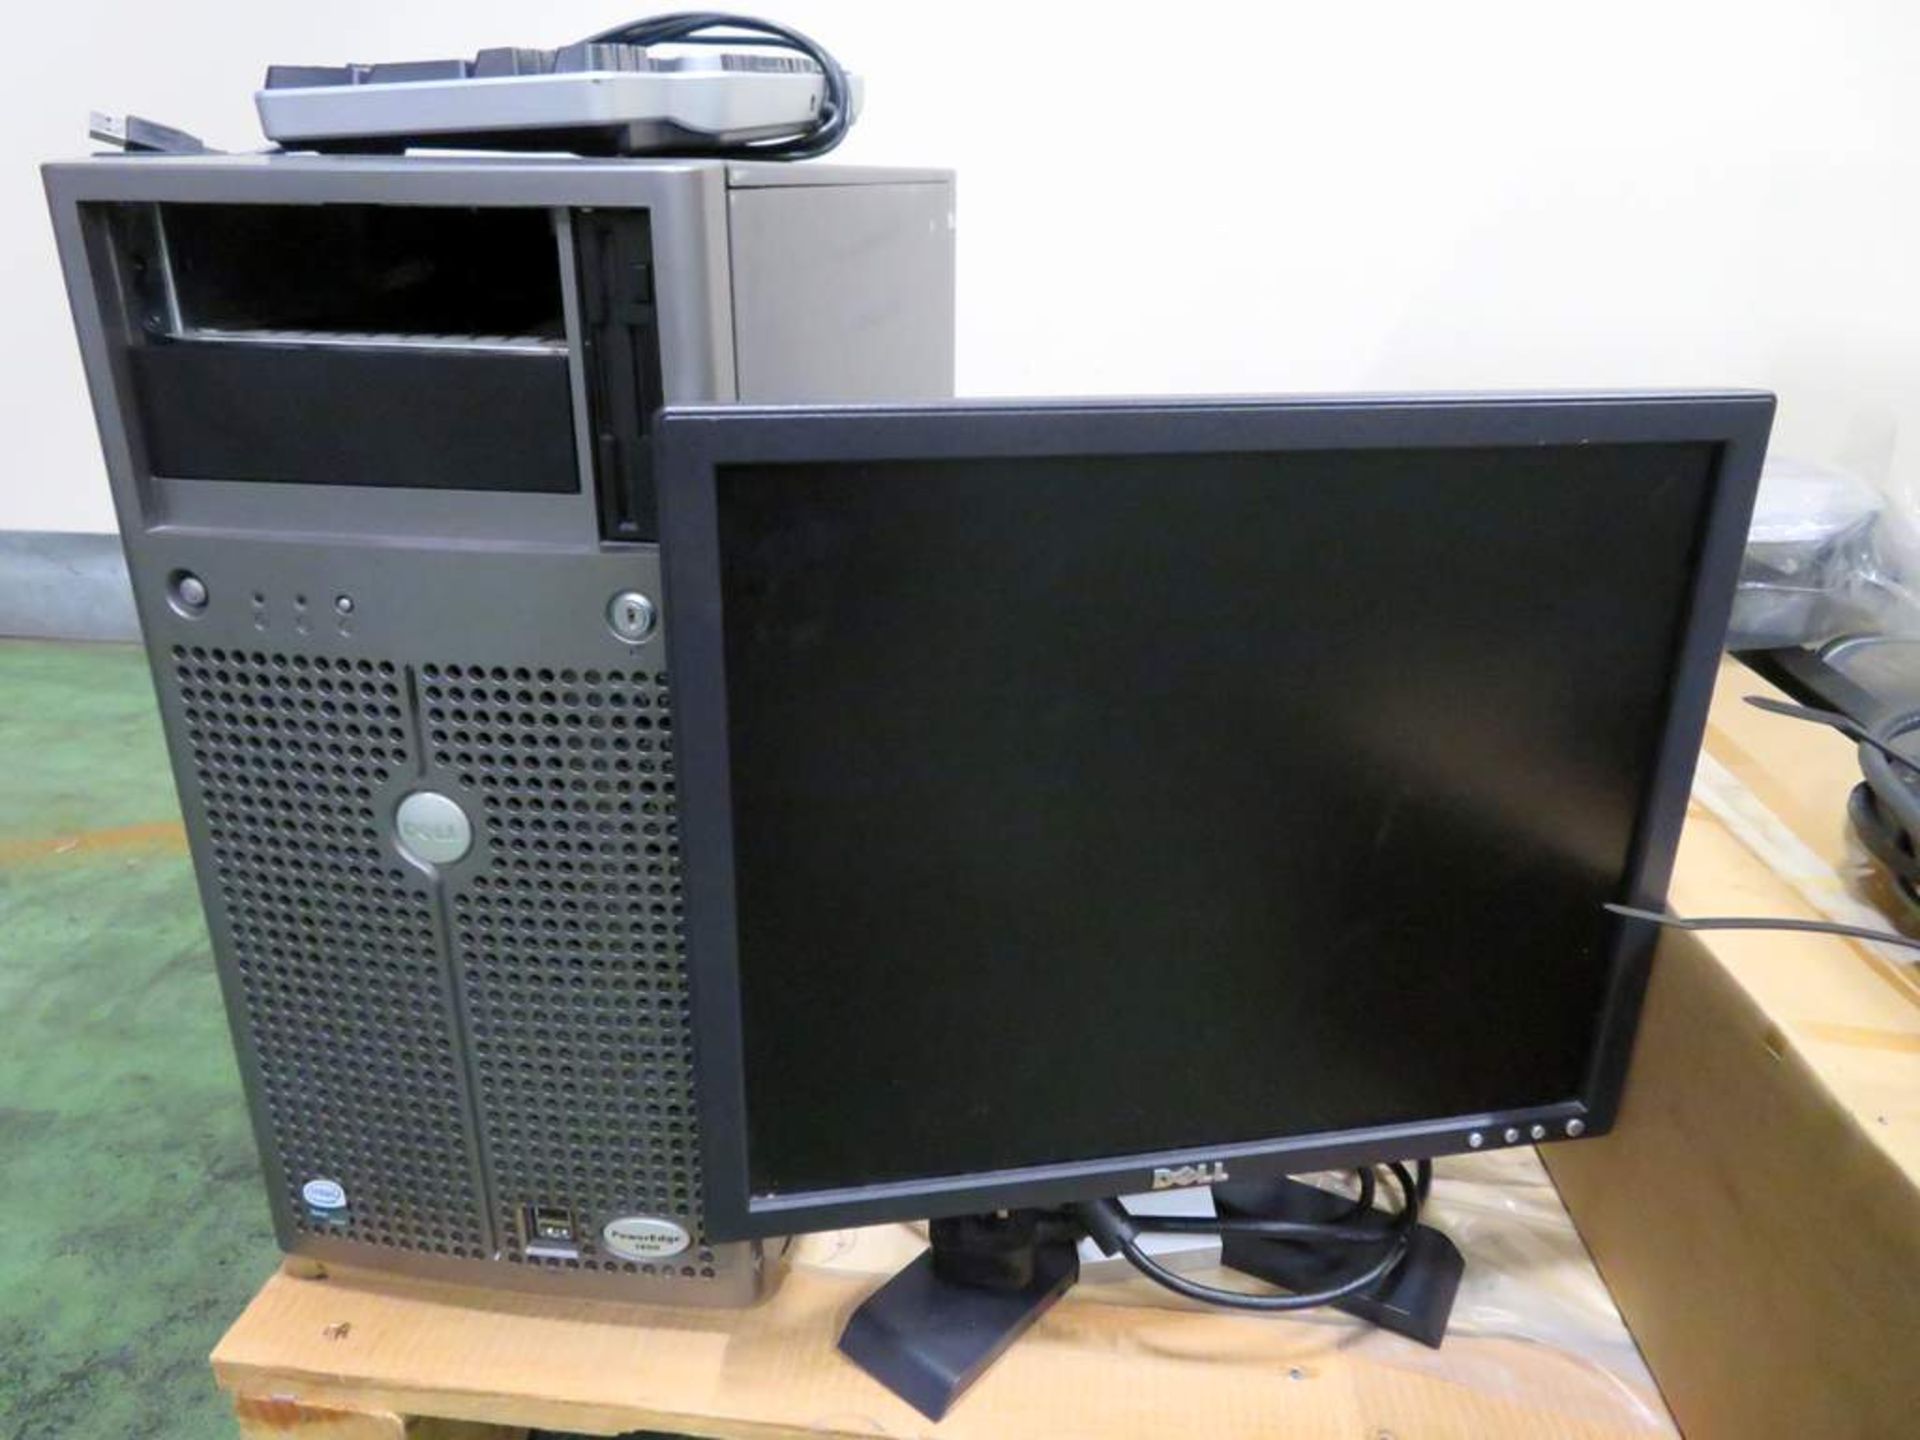 Screen Imagesetter Model FT-R3050 - Complete with Dell desktop computer system. - Image 10 of 14